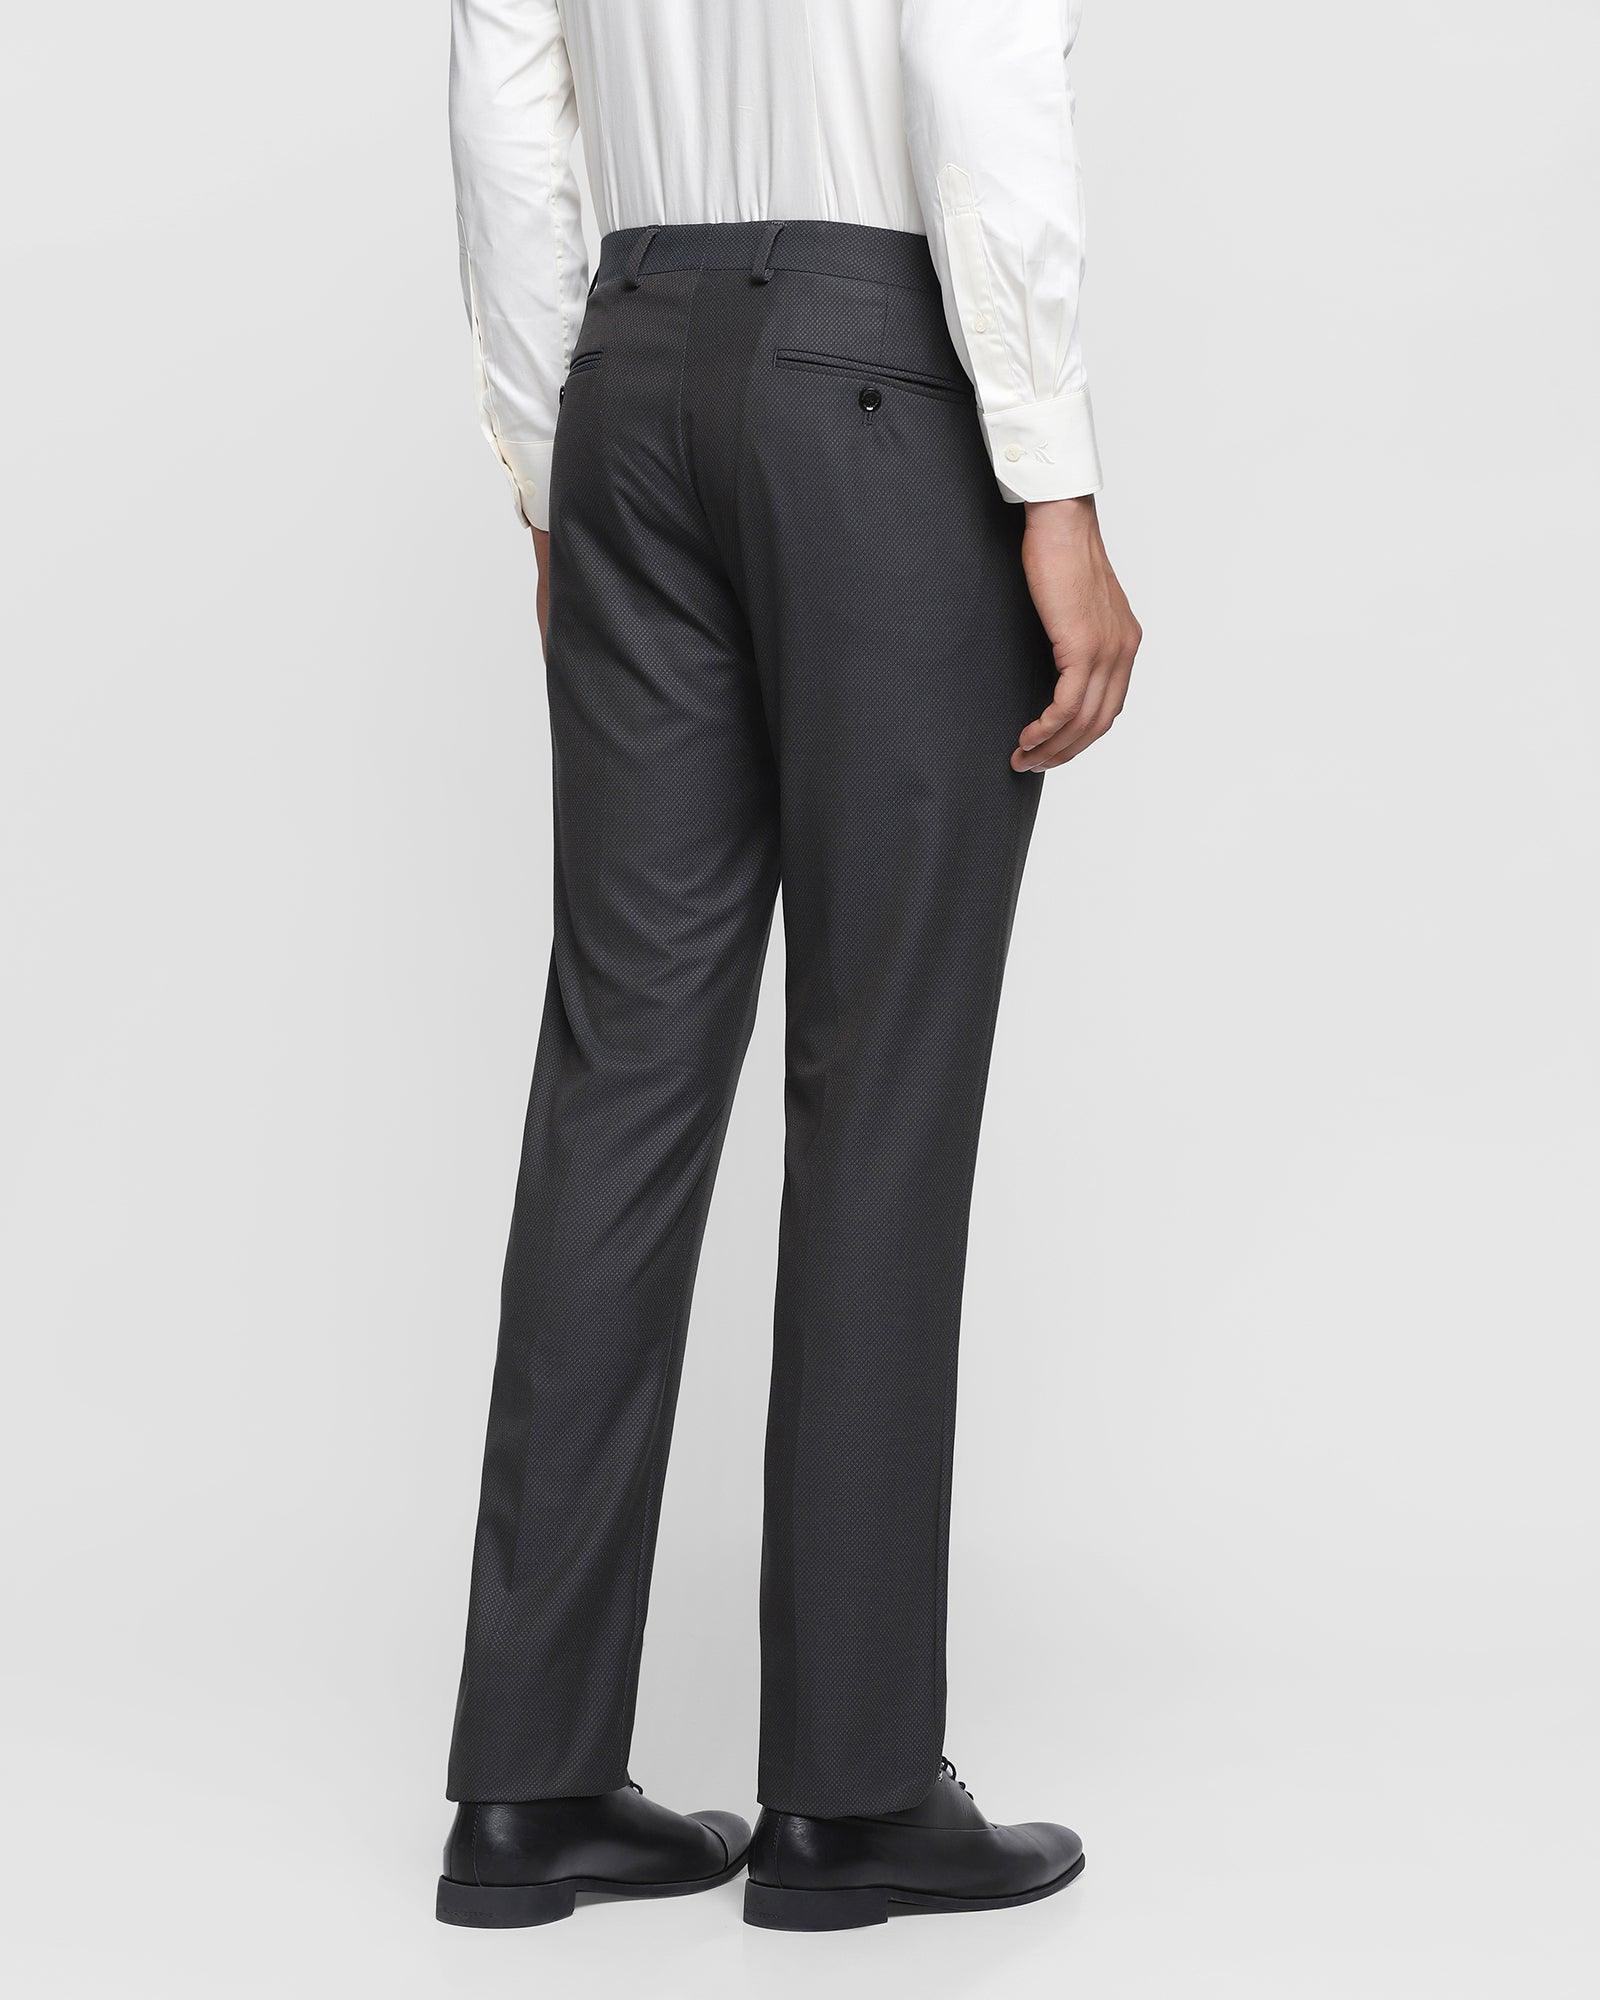 Slim Comfort B-95 Formal Charcoal Textured Trouser - Will